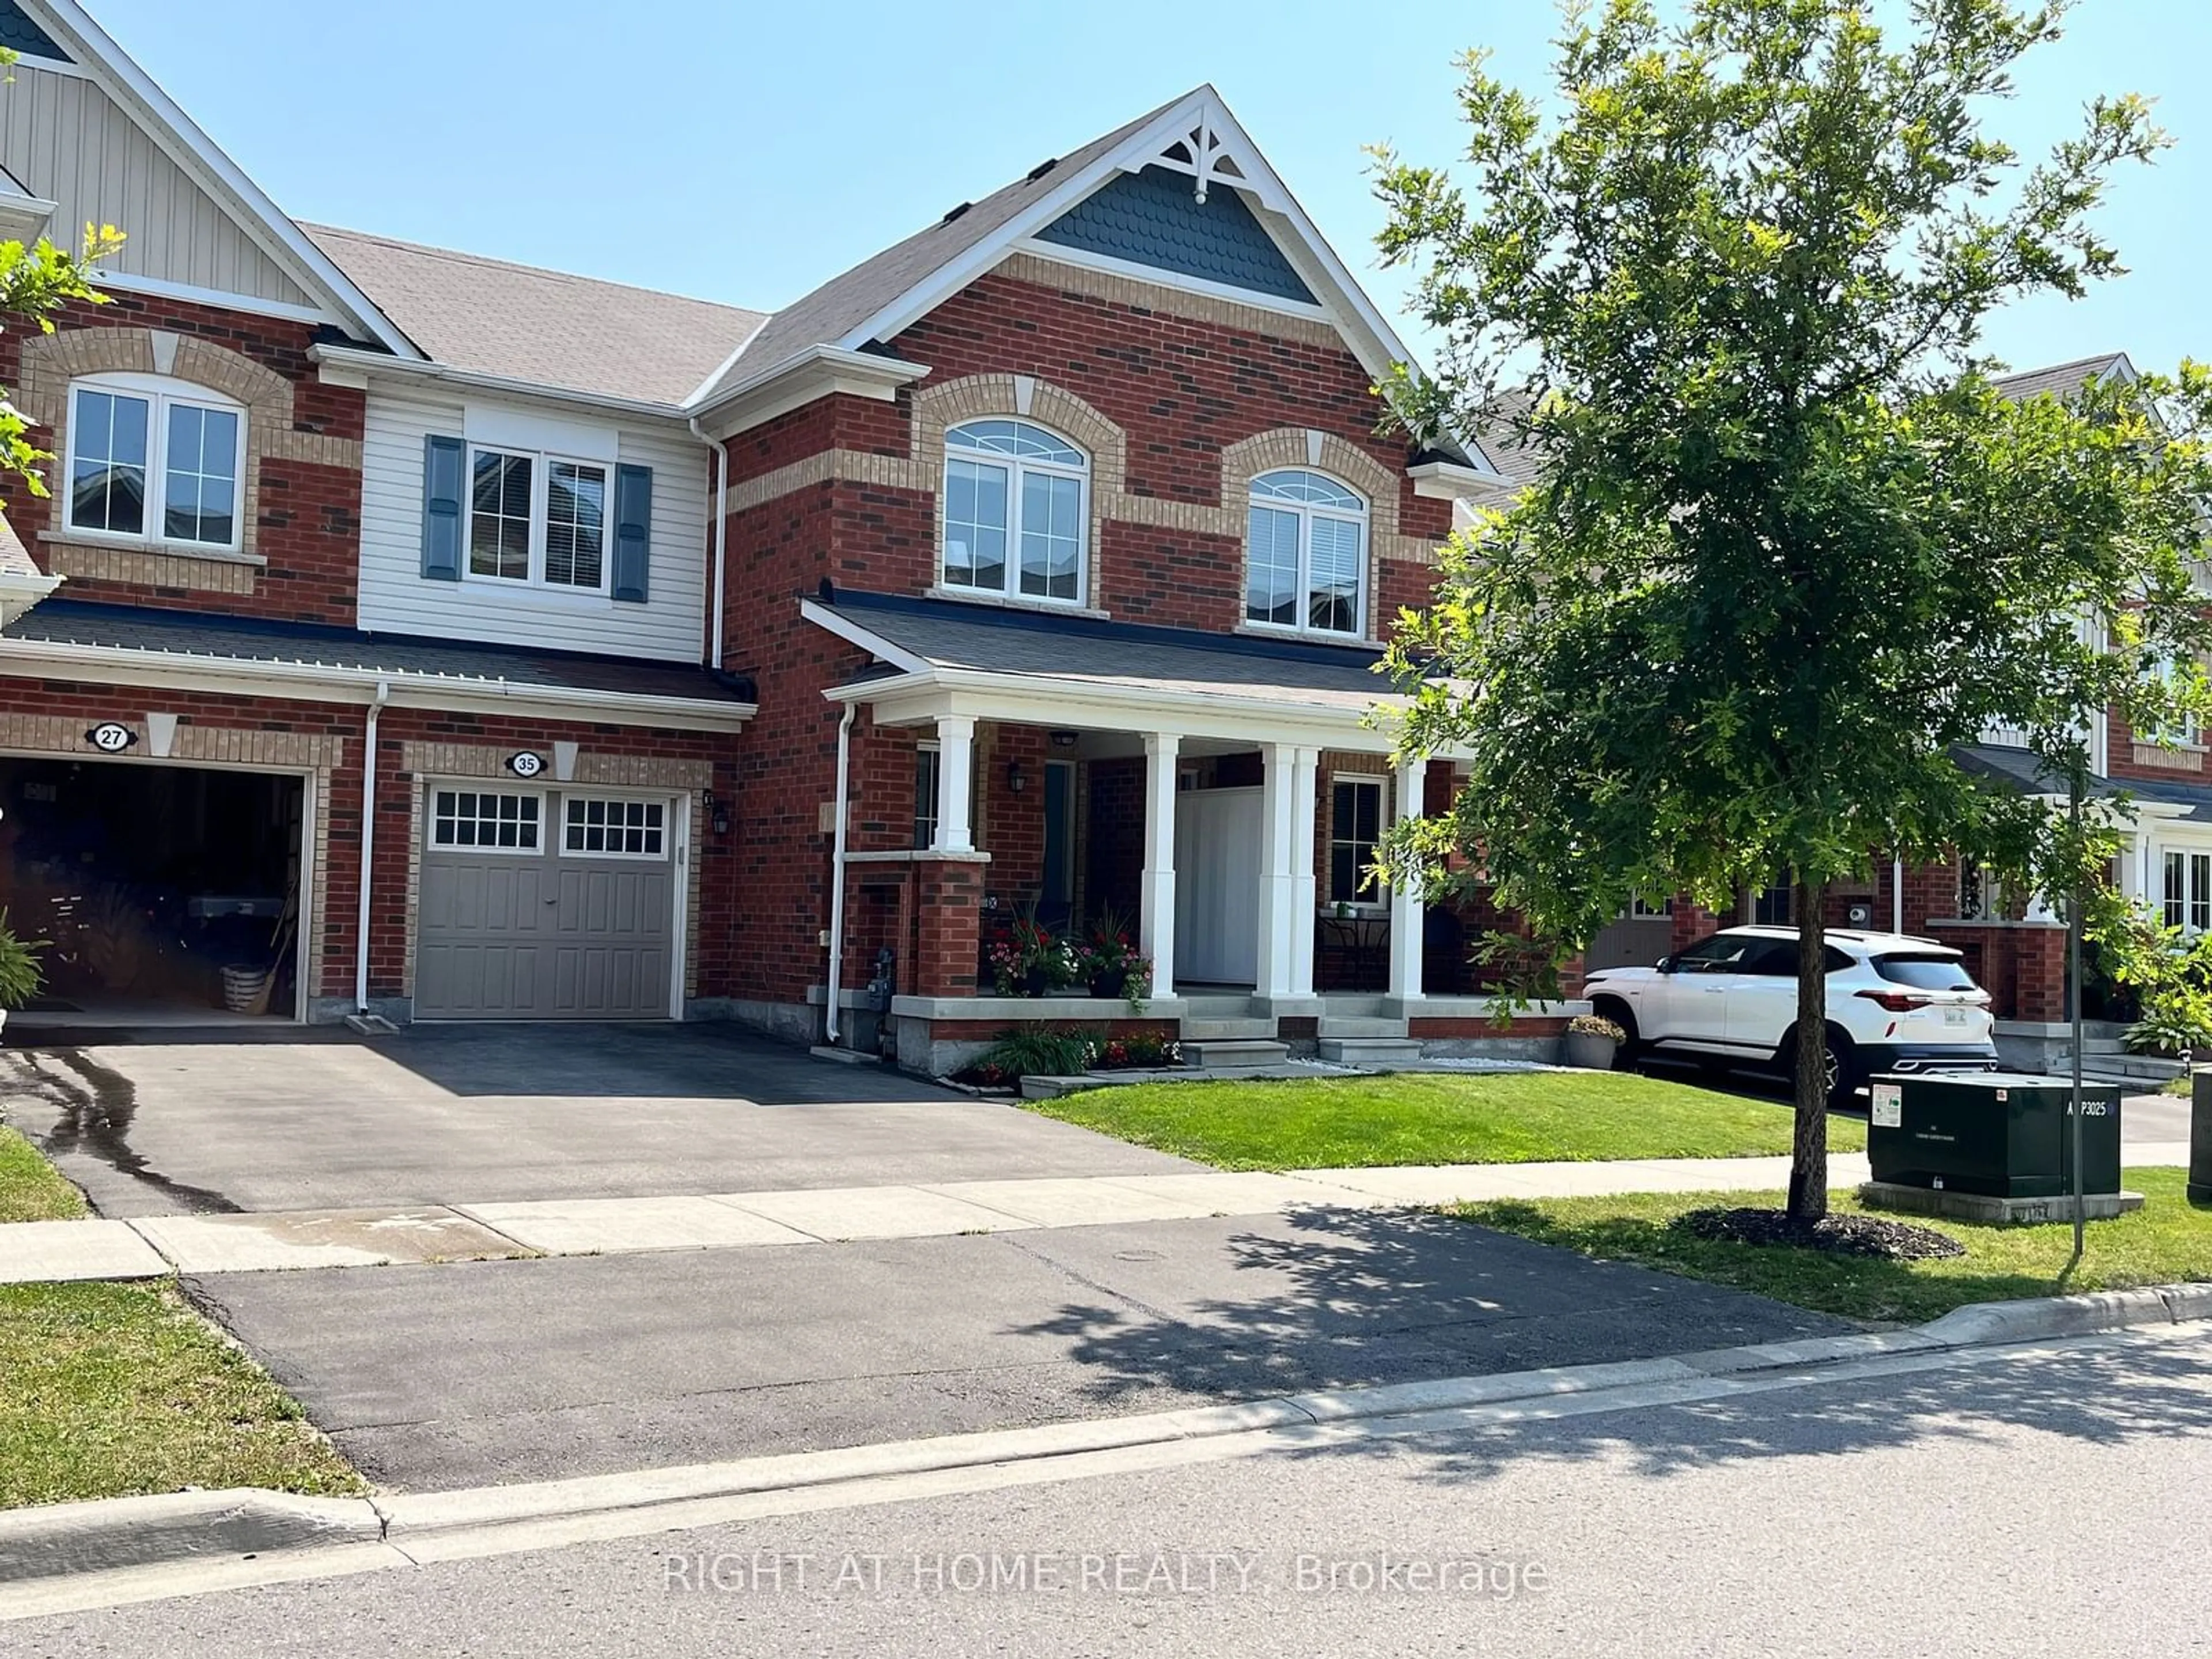 Home with brick exterior material for 35 Stocks Lane, Aurora Ontario L4G 0Y3